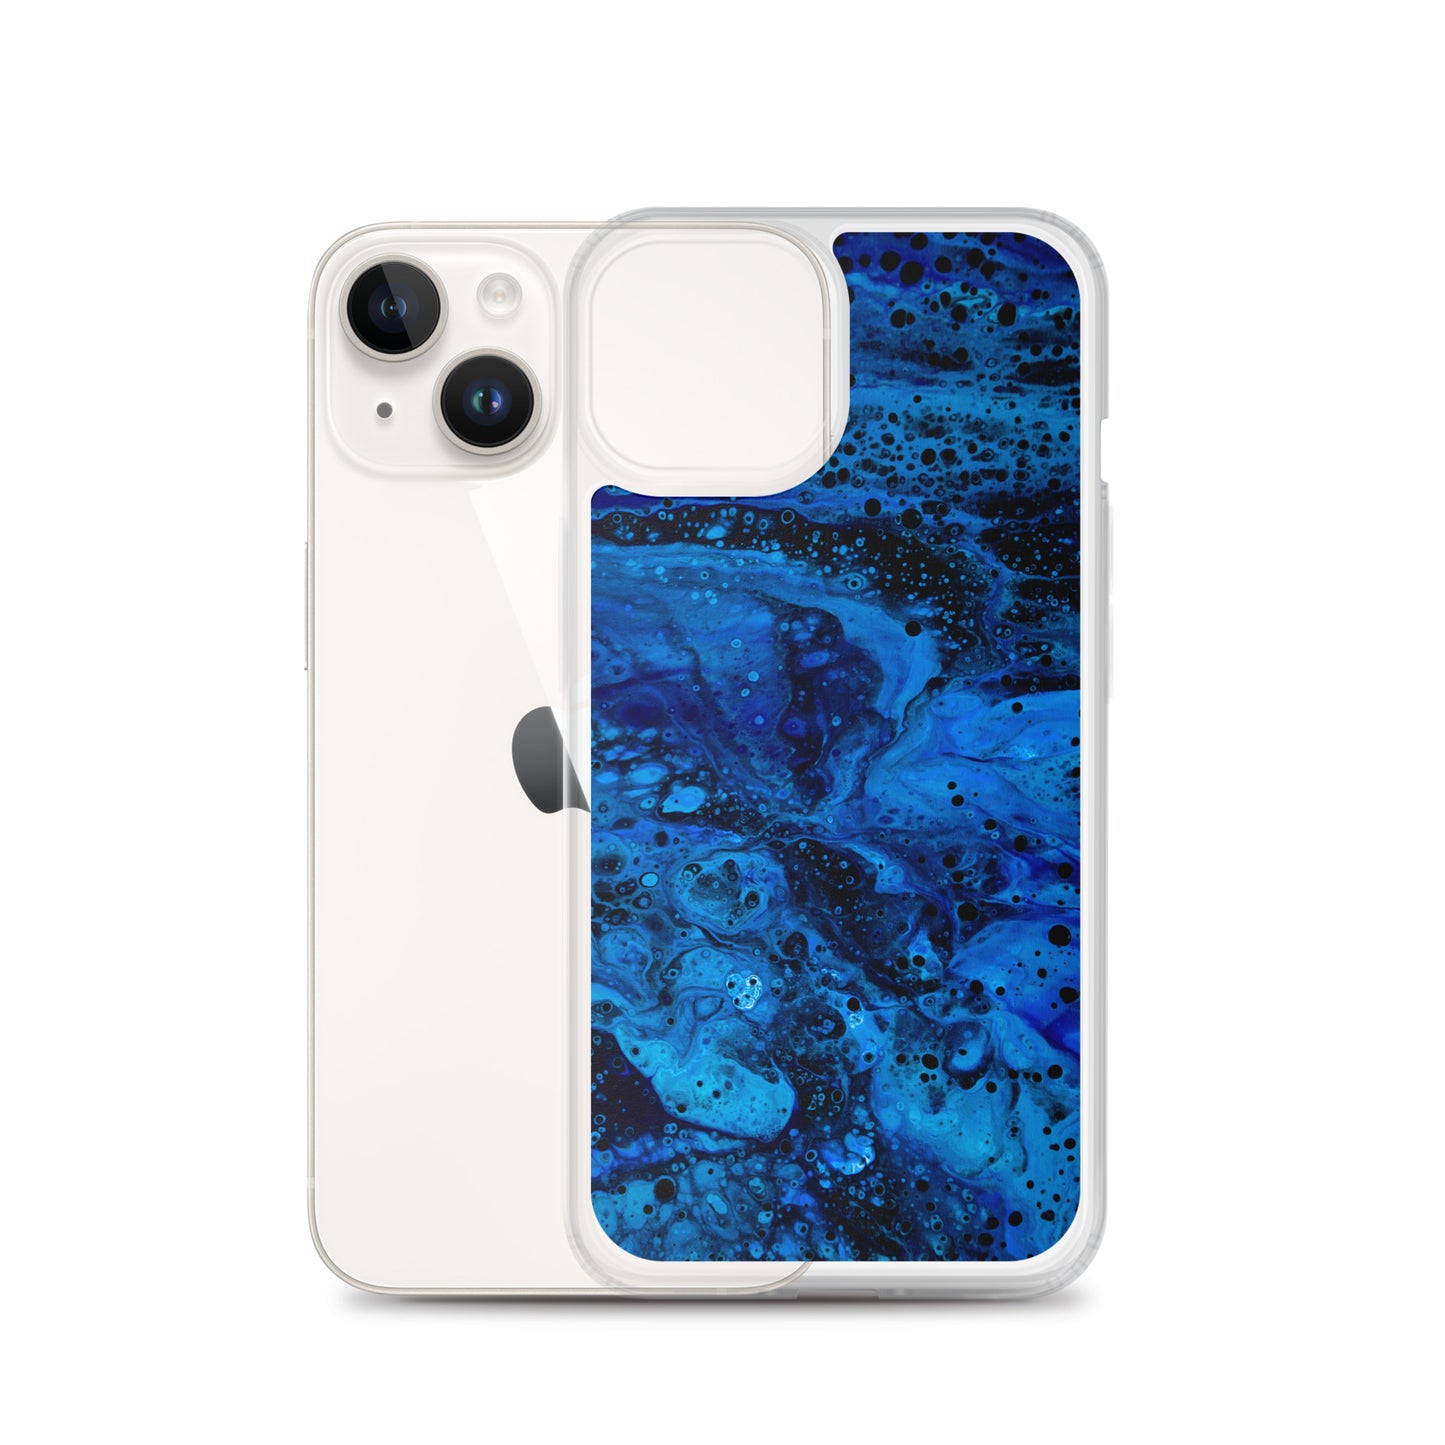 NightOwl Studio Custom Phone Case Compatible with iPhone, Ultra Slim Cover with Heavy Duty Scratch Resistant Shockproof Protection, Blue Abyss